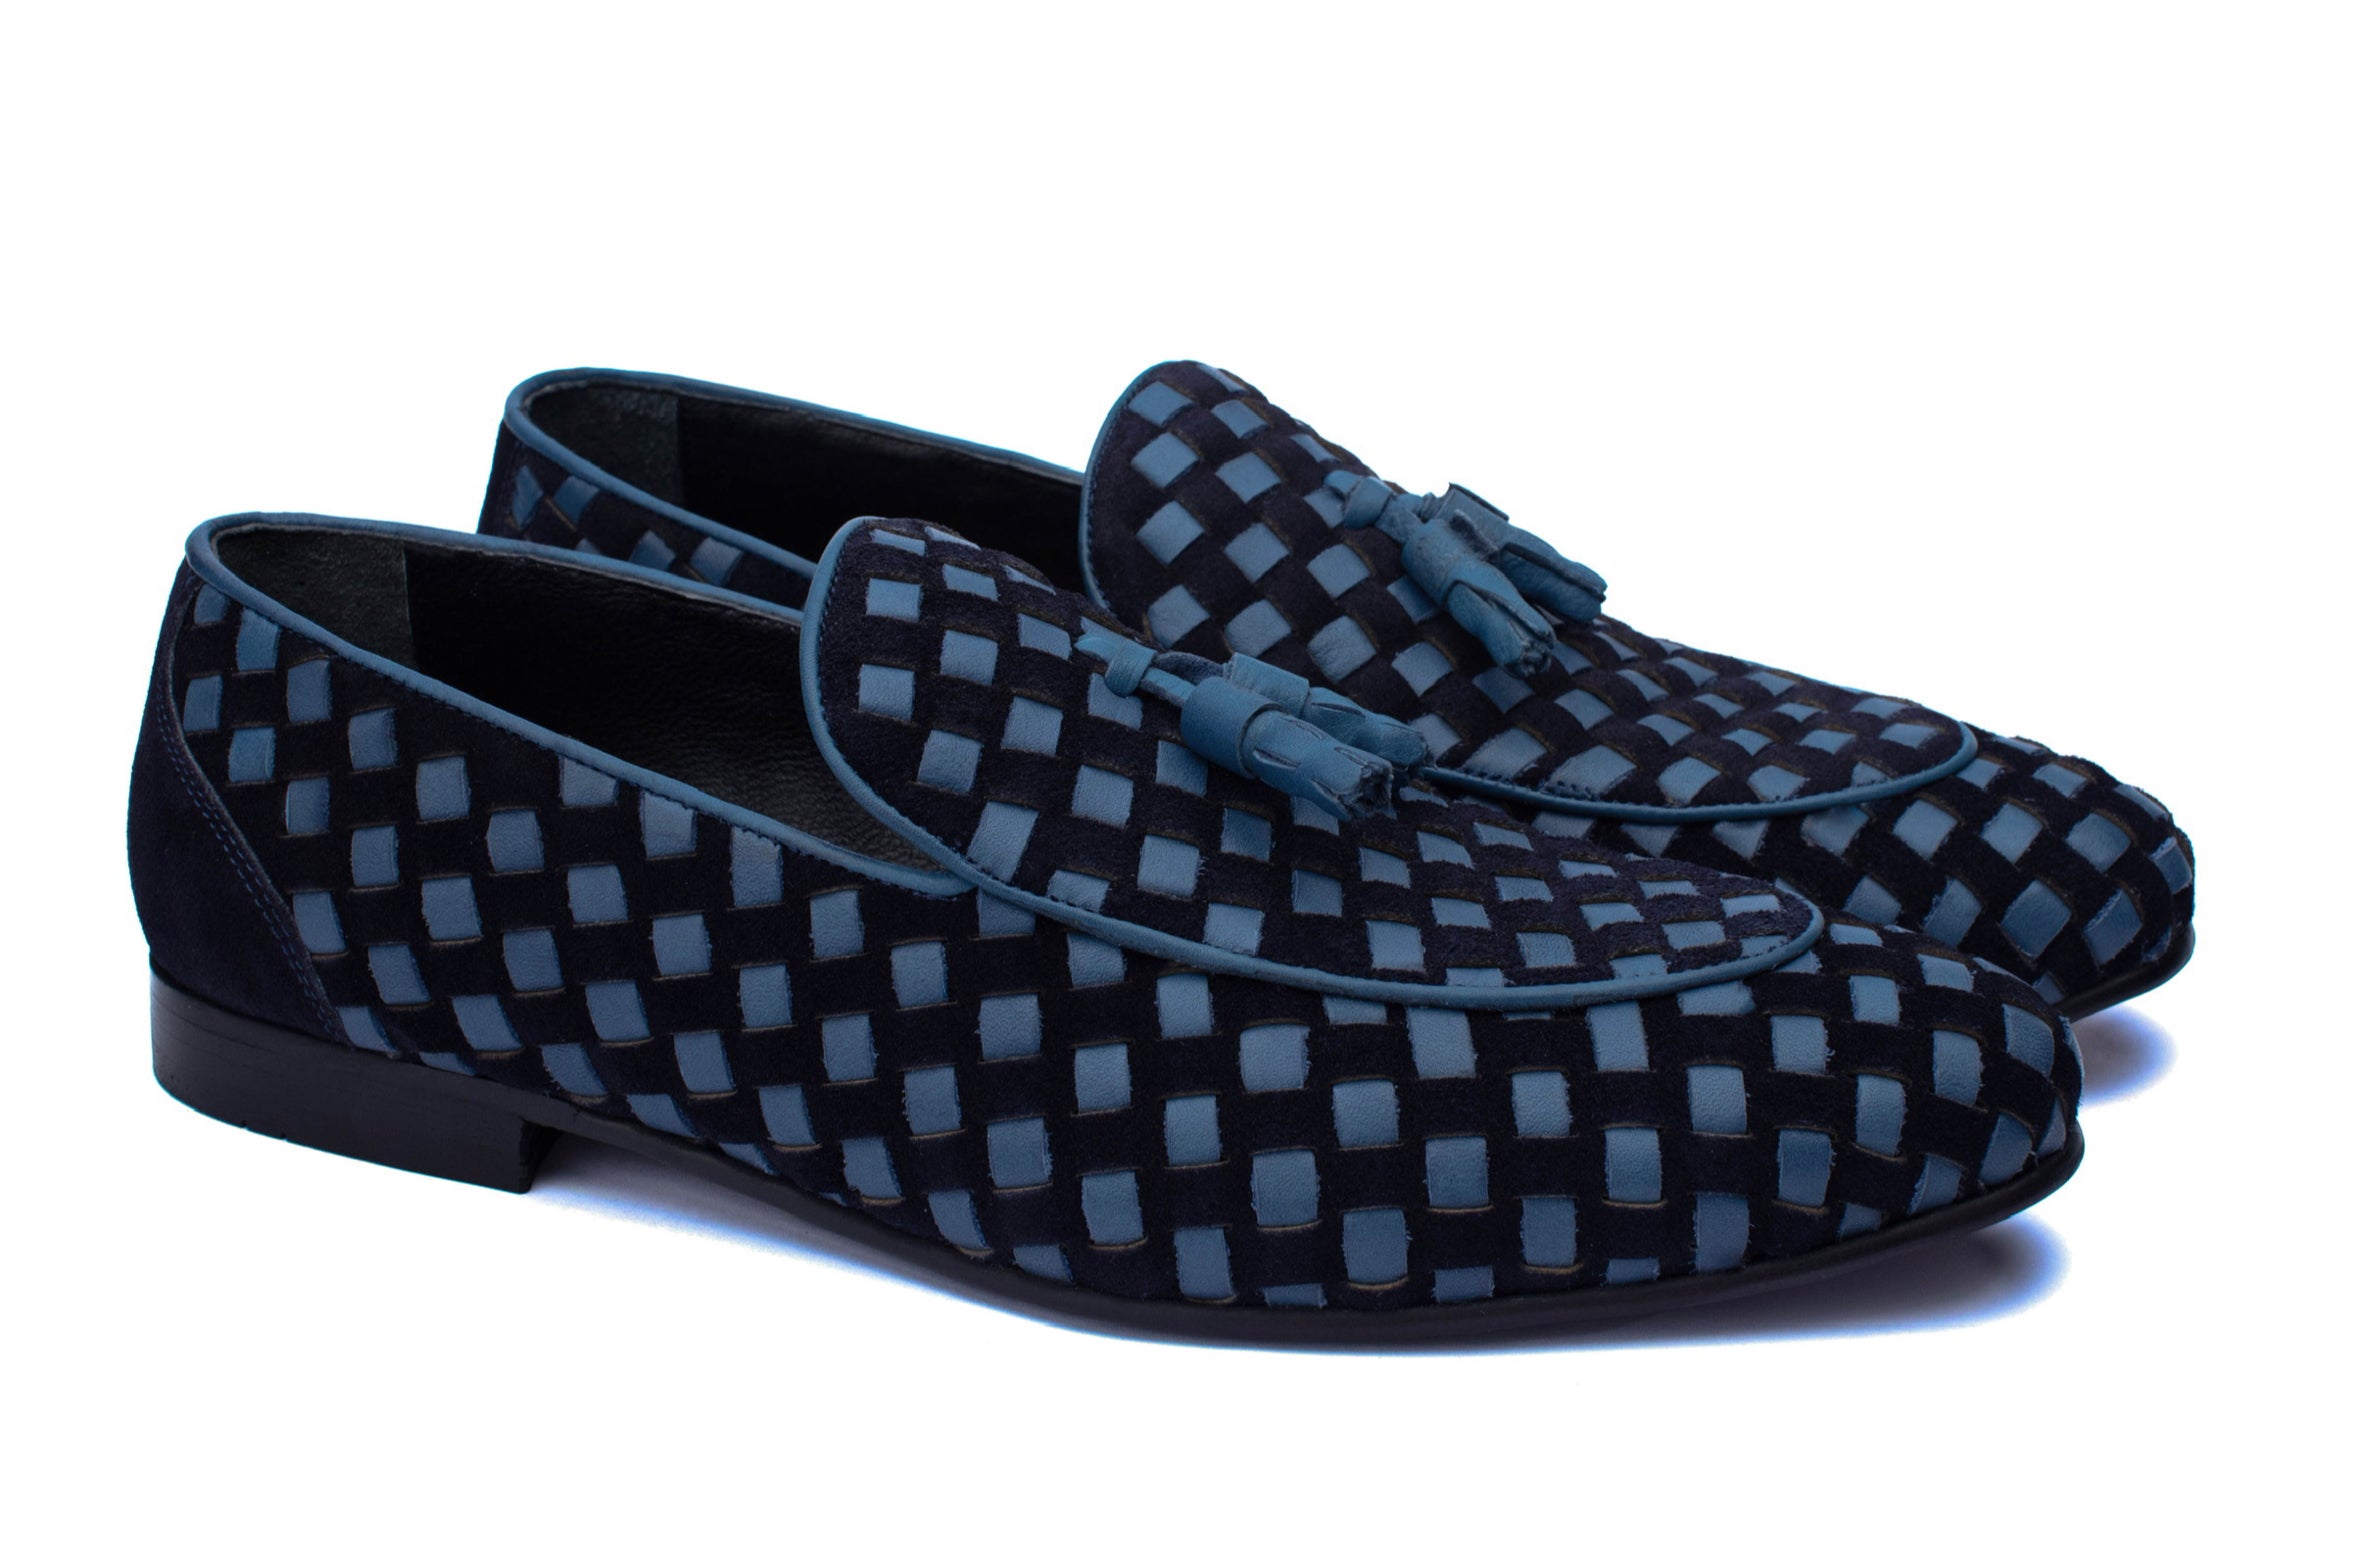 The Braided Loafers - Navy - Loafers by Urbbana